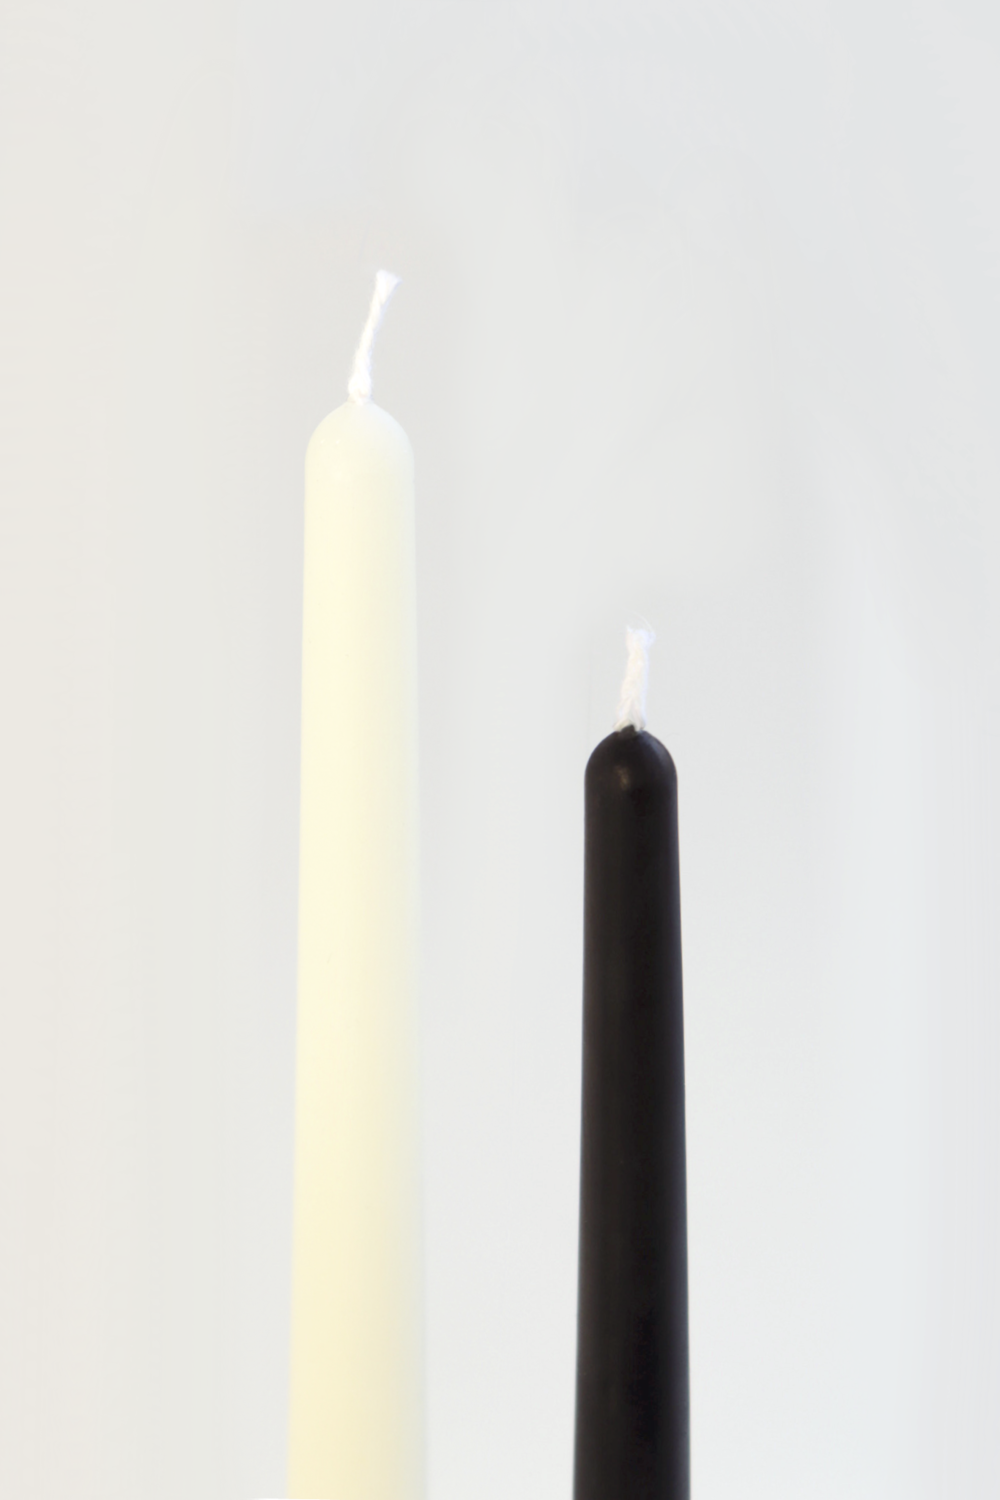 Mmann Candles - Magic Stix Beeswax Taper - Black & White - Set of Two